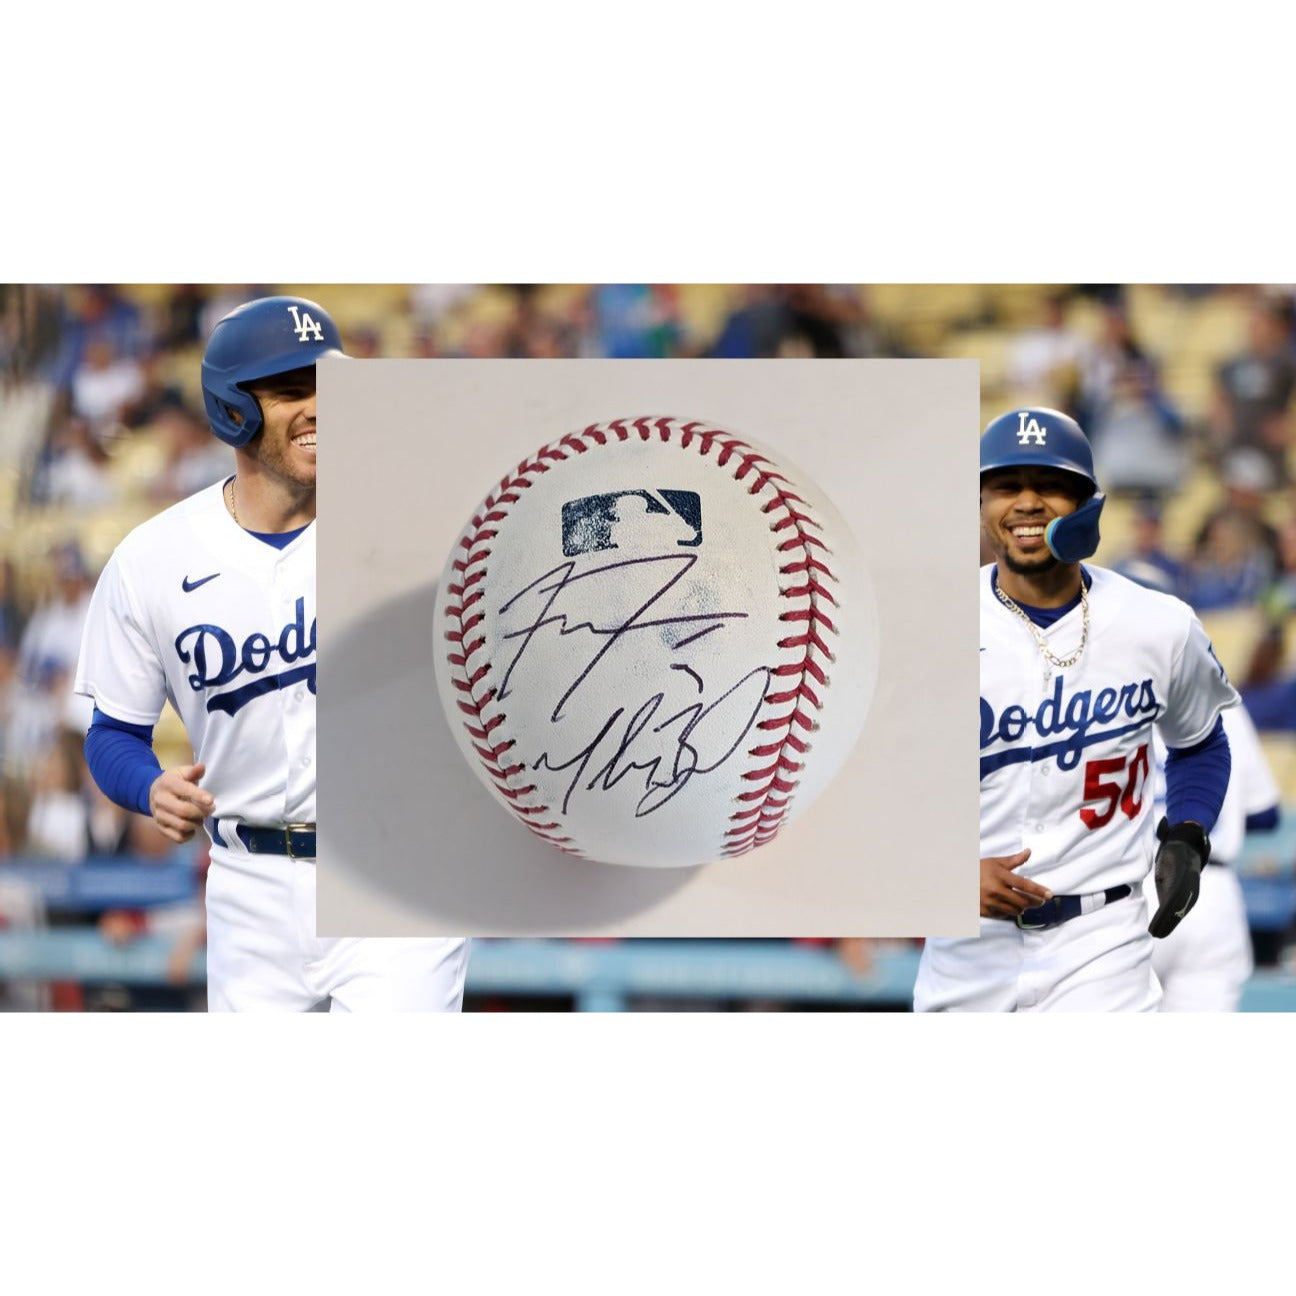 Freddie Freeman & Mookie Betts Los Angeles Dodgers Rawlings MLB official MLB baseball signed with proof and free display case